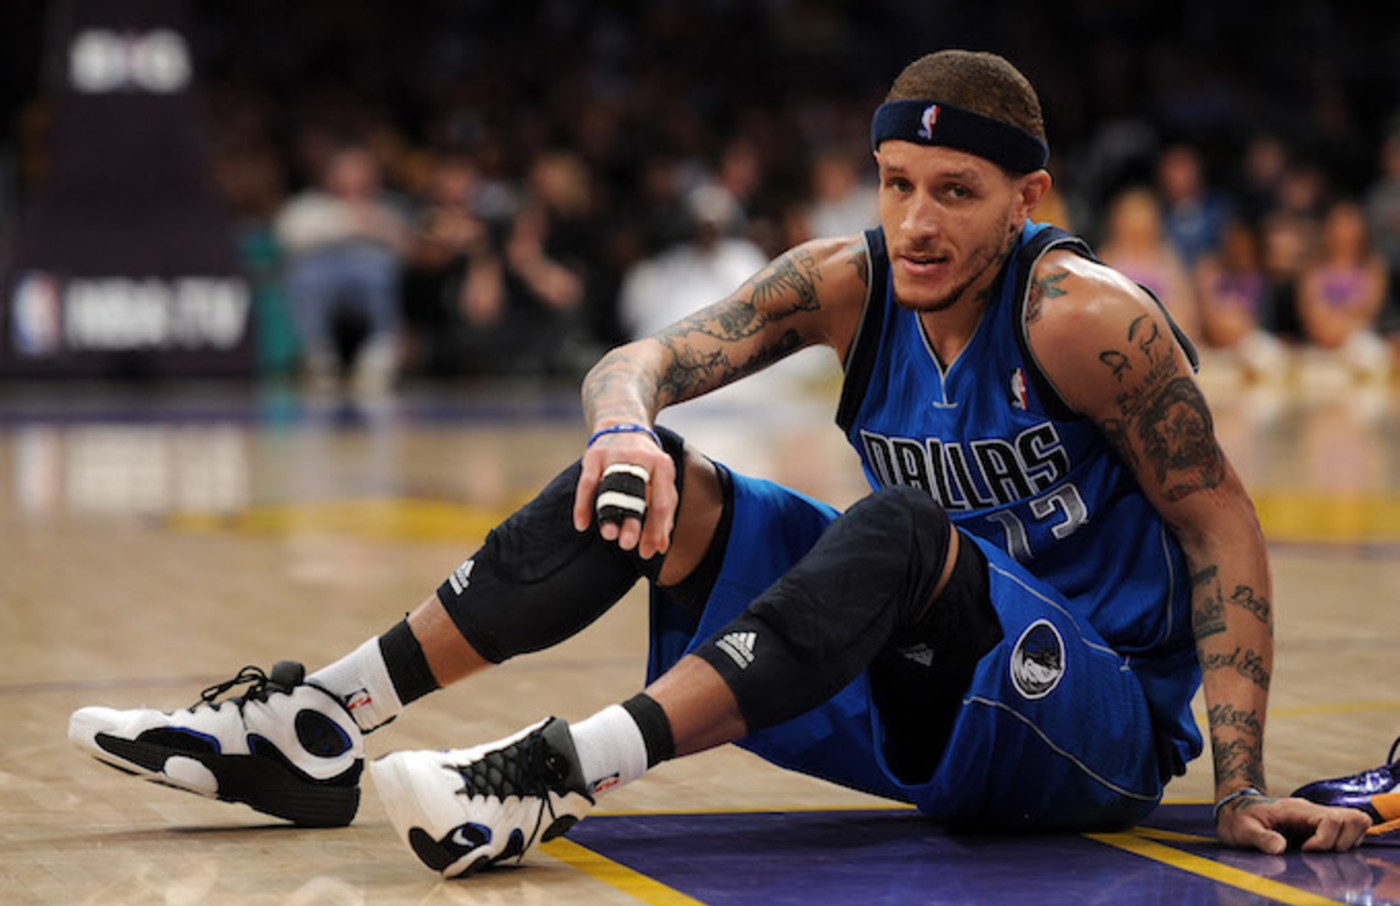 Video Shows Former NBA Player Delonte West Following Alleged